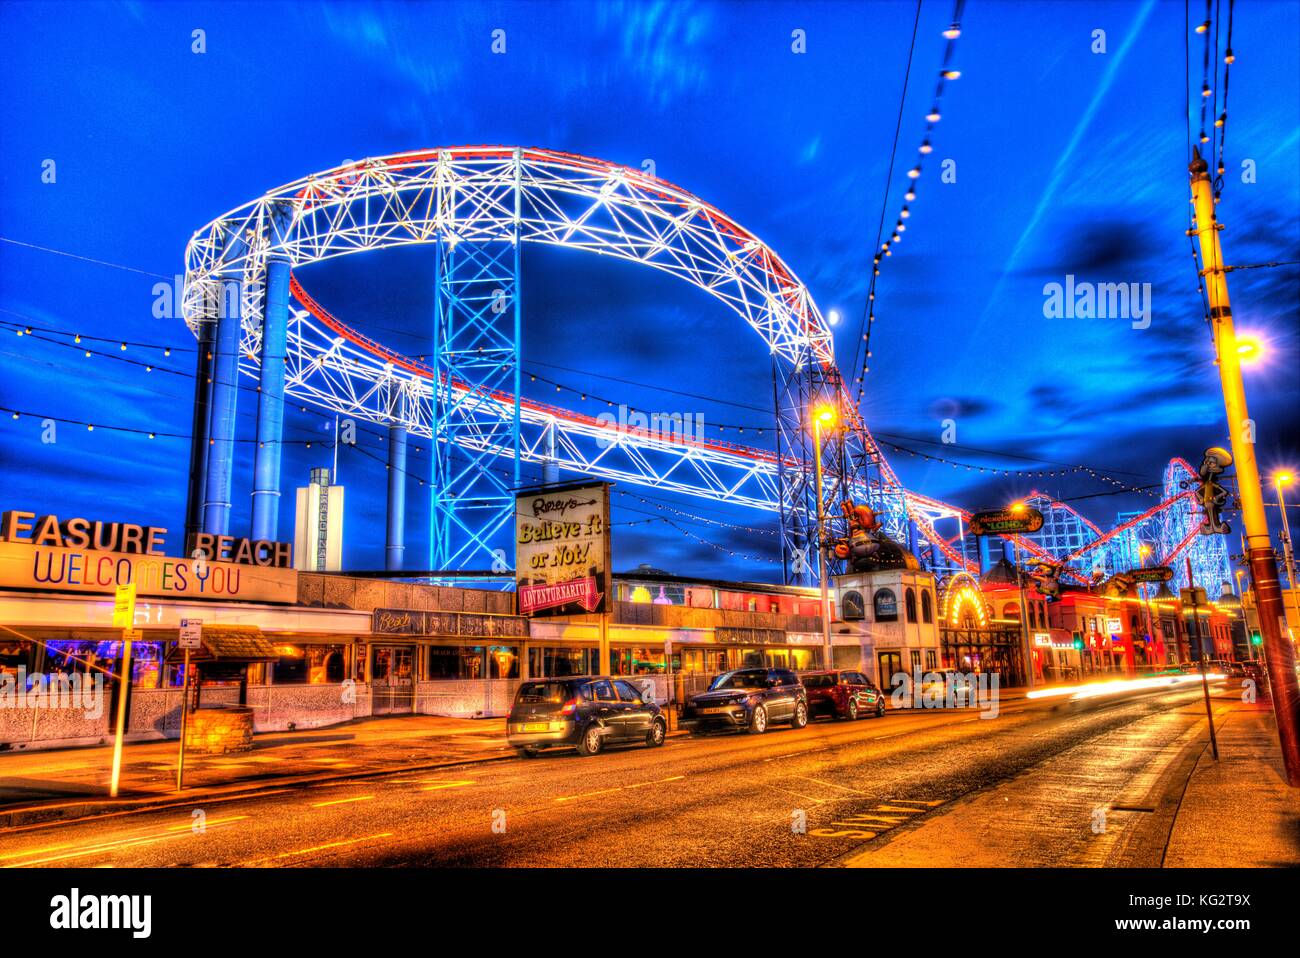 Town of Blackpool, England. Artistic night view of Blackpool Pleasure Beach. This photograph has been produced by merging three differently exposed im Stock Photo